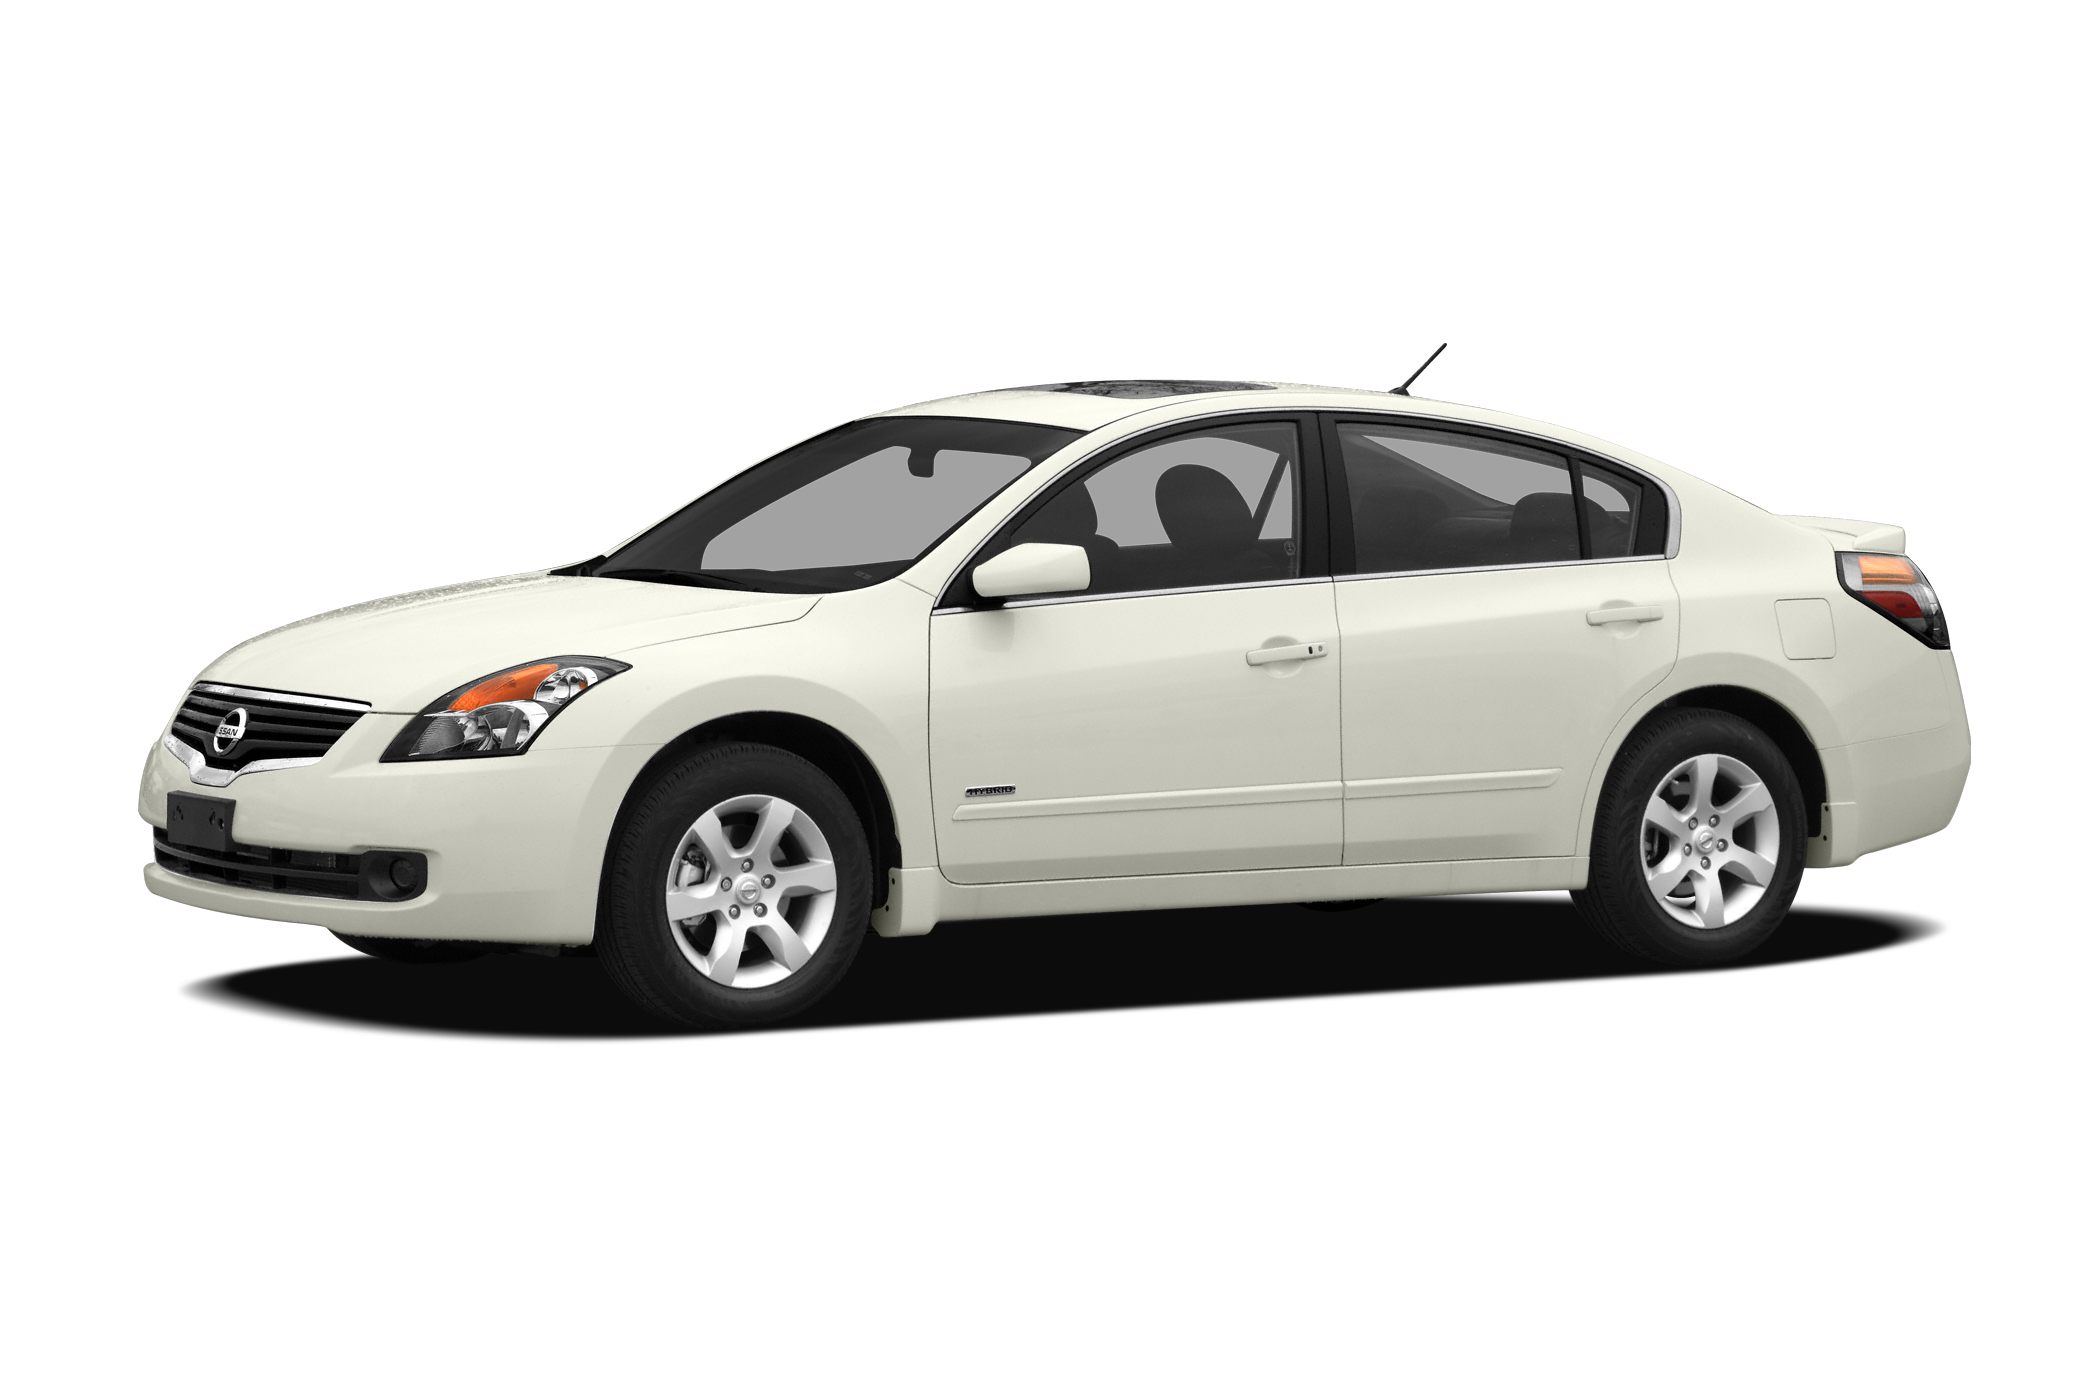 2008 Nissan Altima Hybrid Pictures